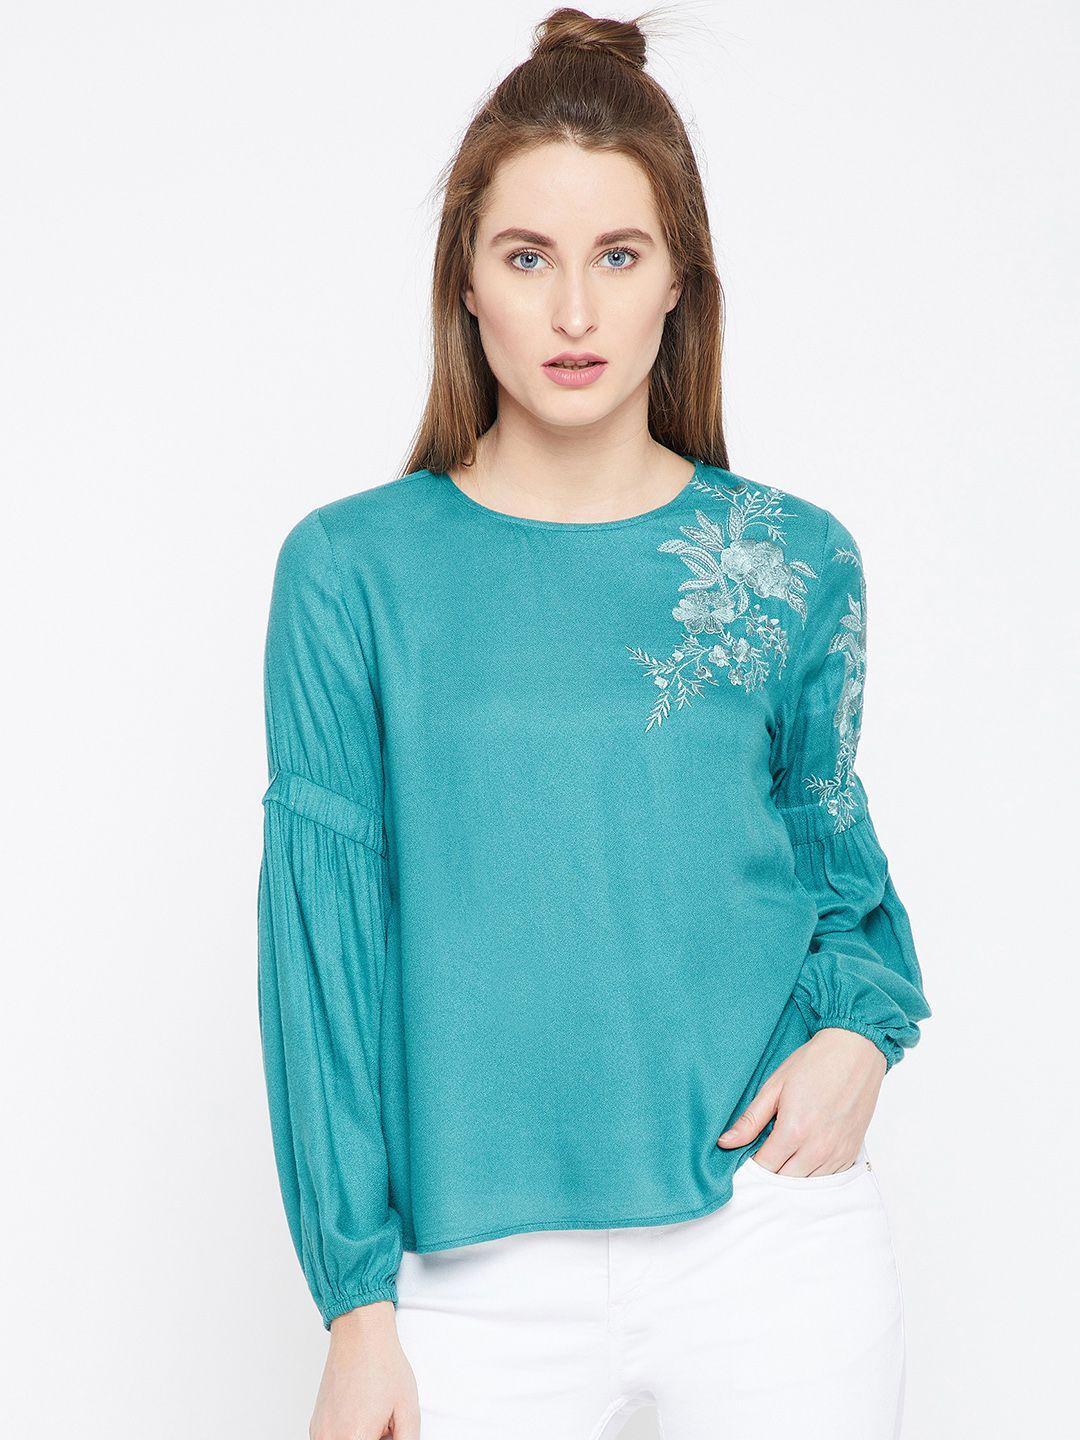 rare women teal solid top